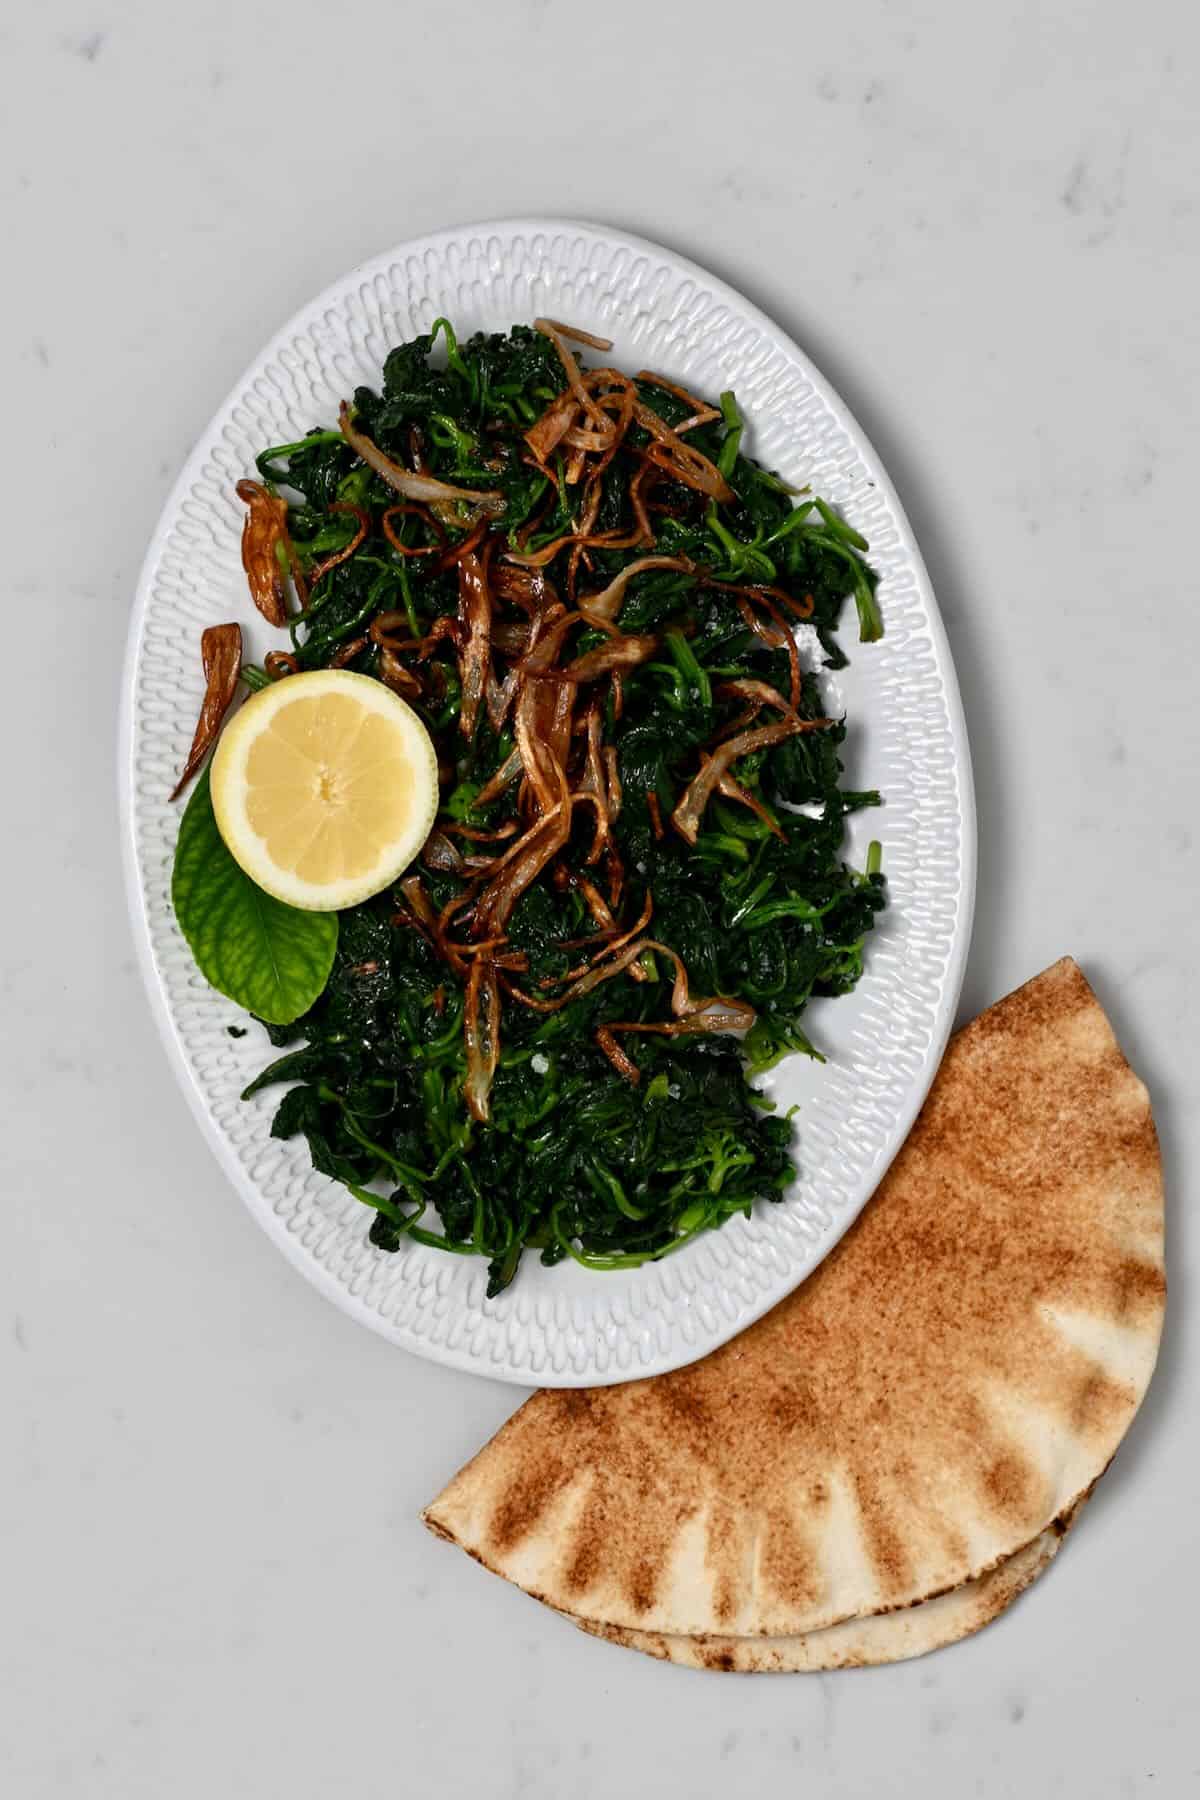 A plate with spinach and crispy onion and pita bread